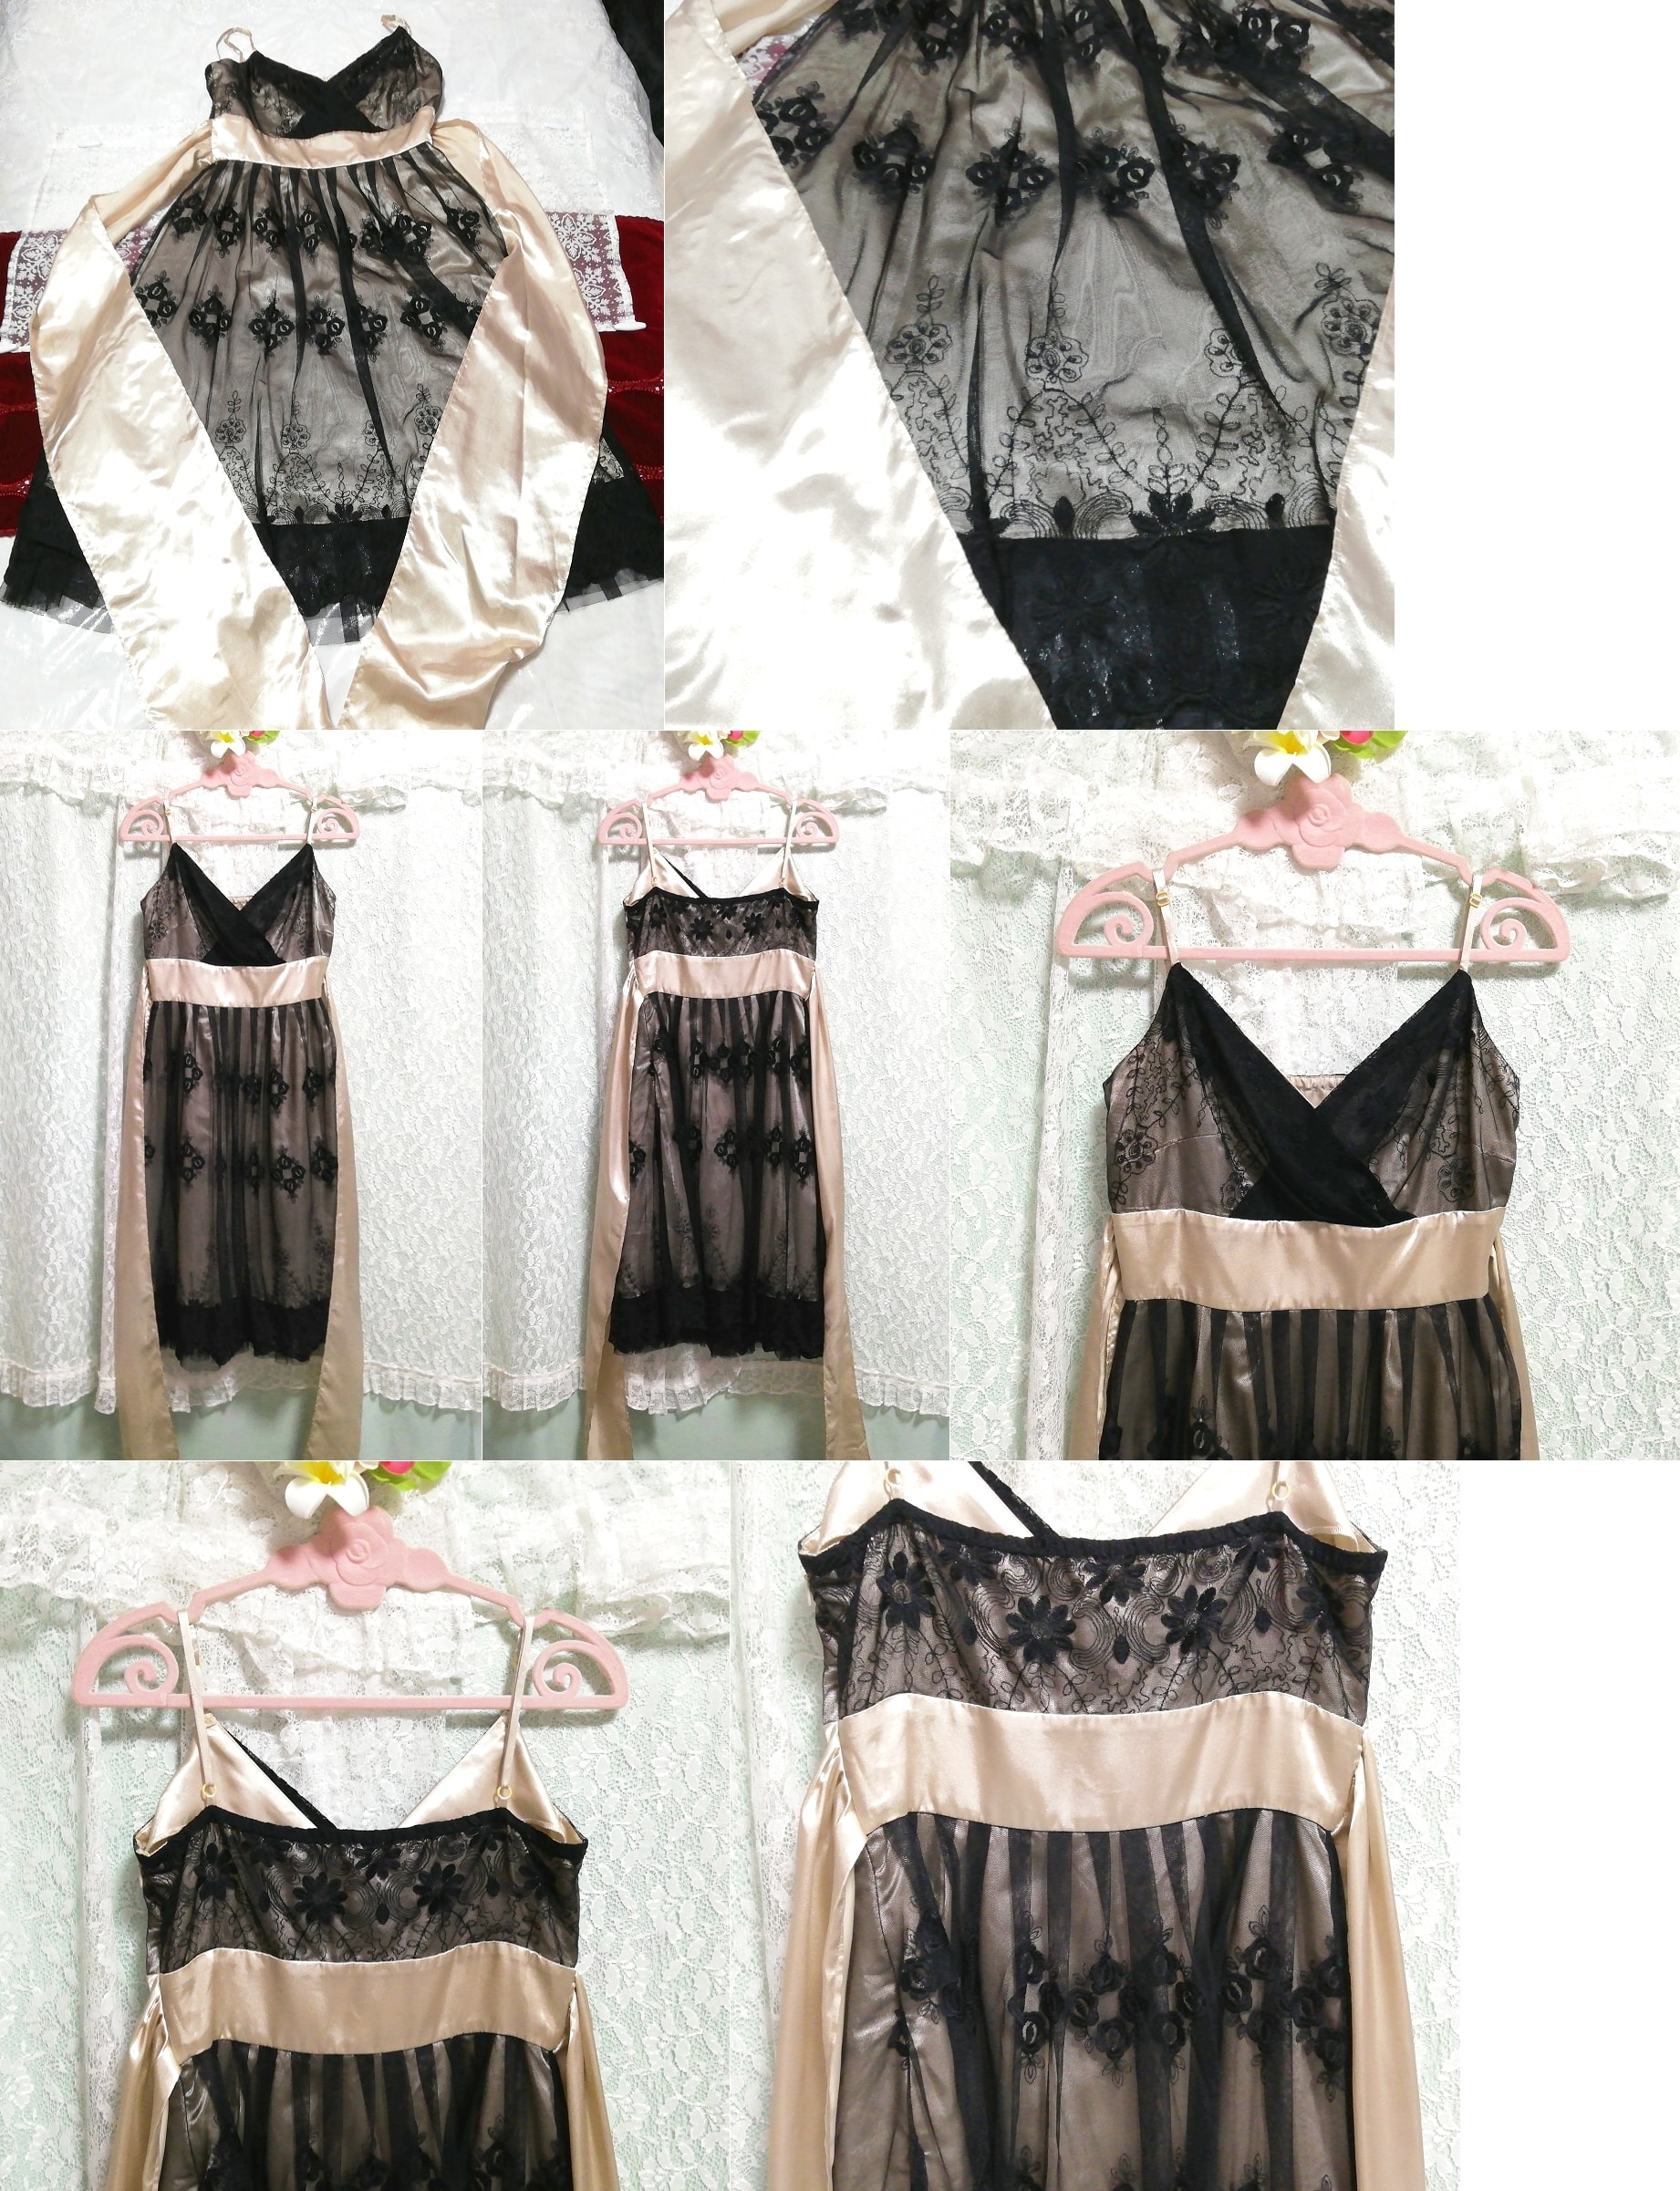 Champagne pink black lace negligee nightgown camisole dress, knee length skirt, m size